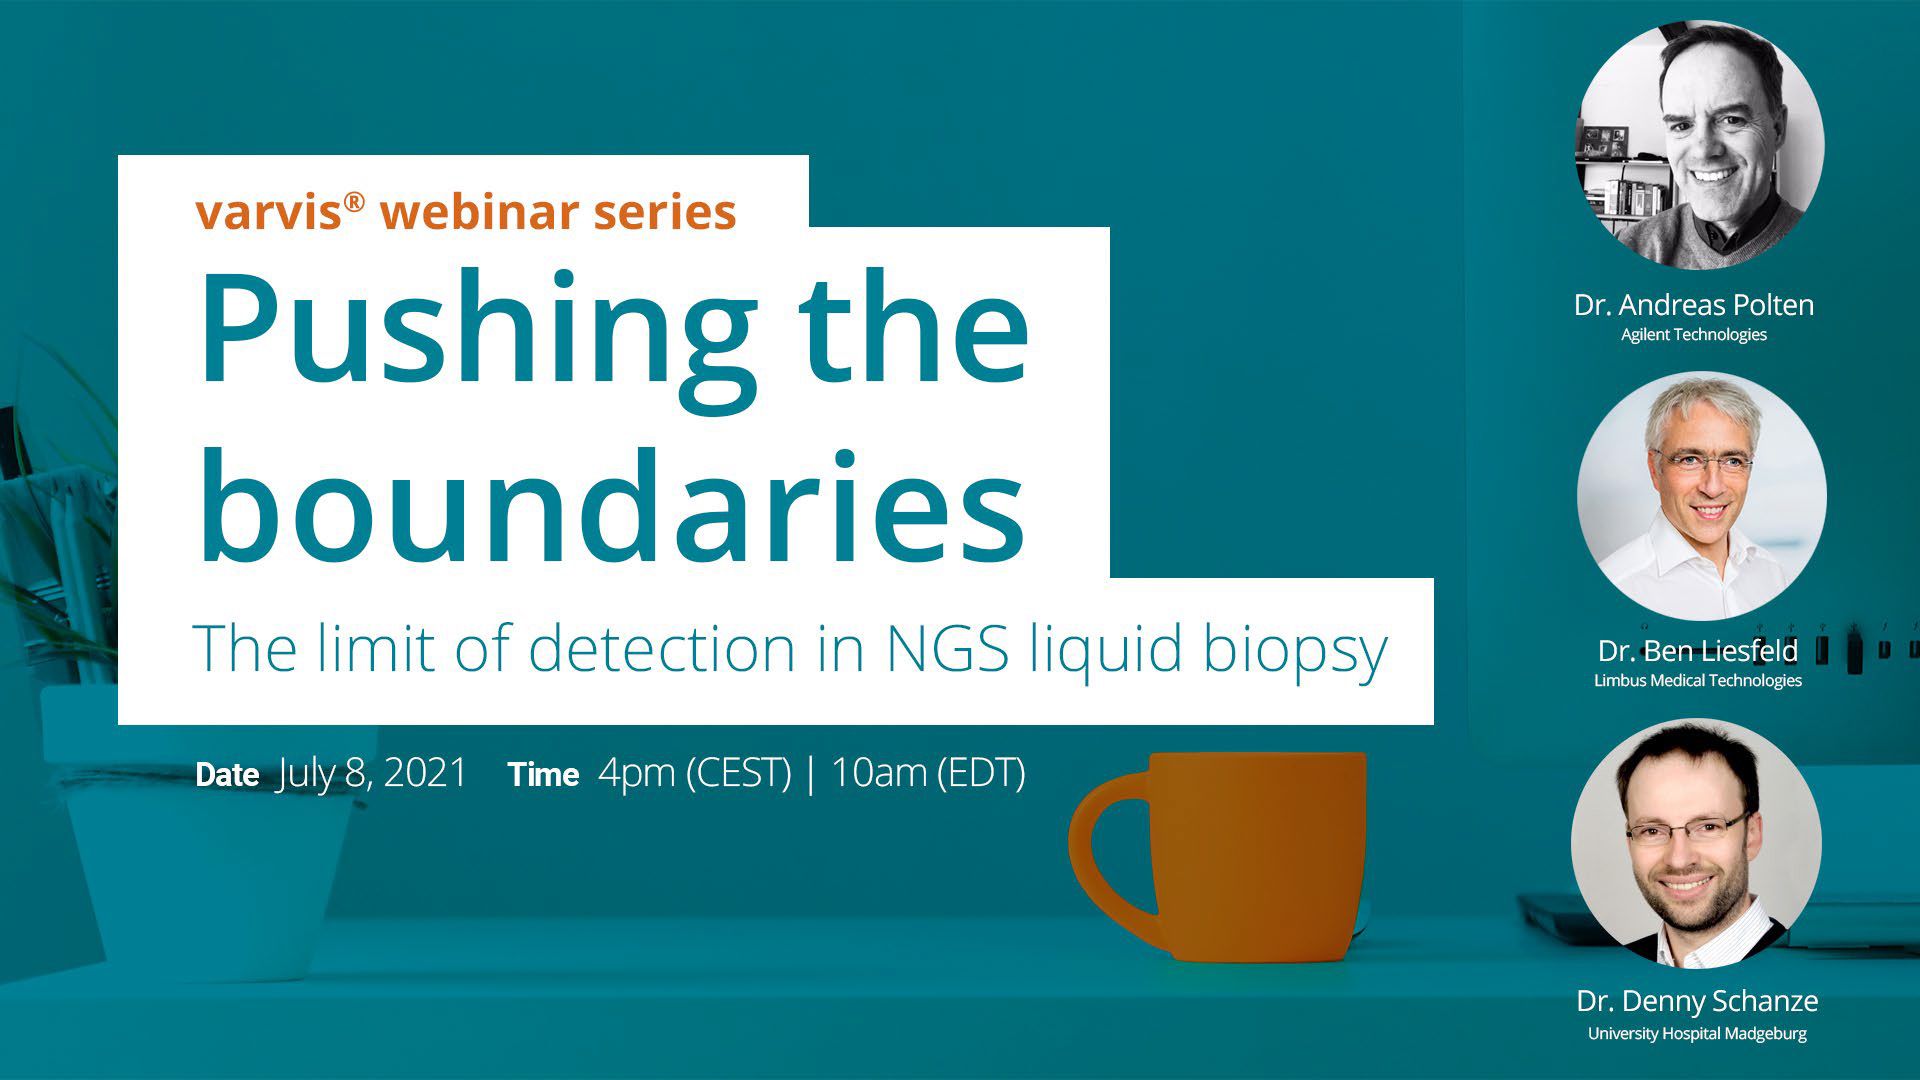 Watch now our webinar on-demand: "Pushing the boundaries - The limit of detection in NGS liquid biopsy"